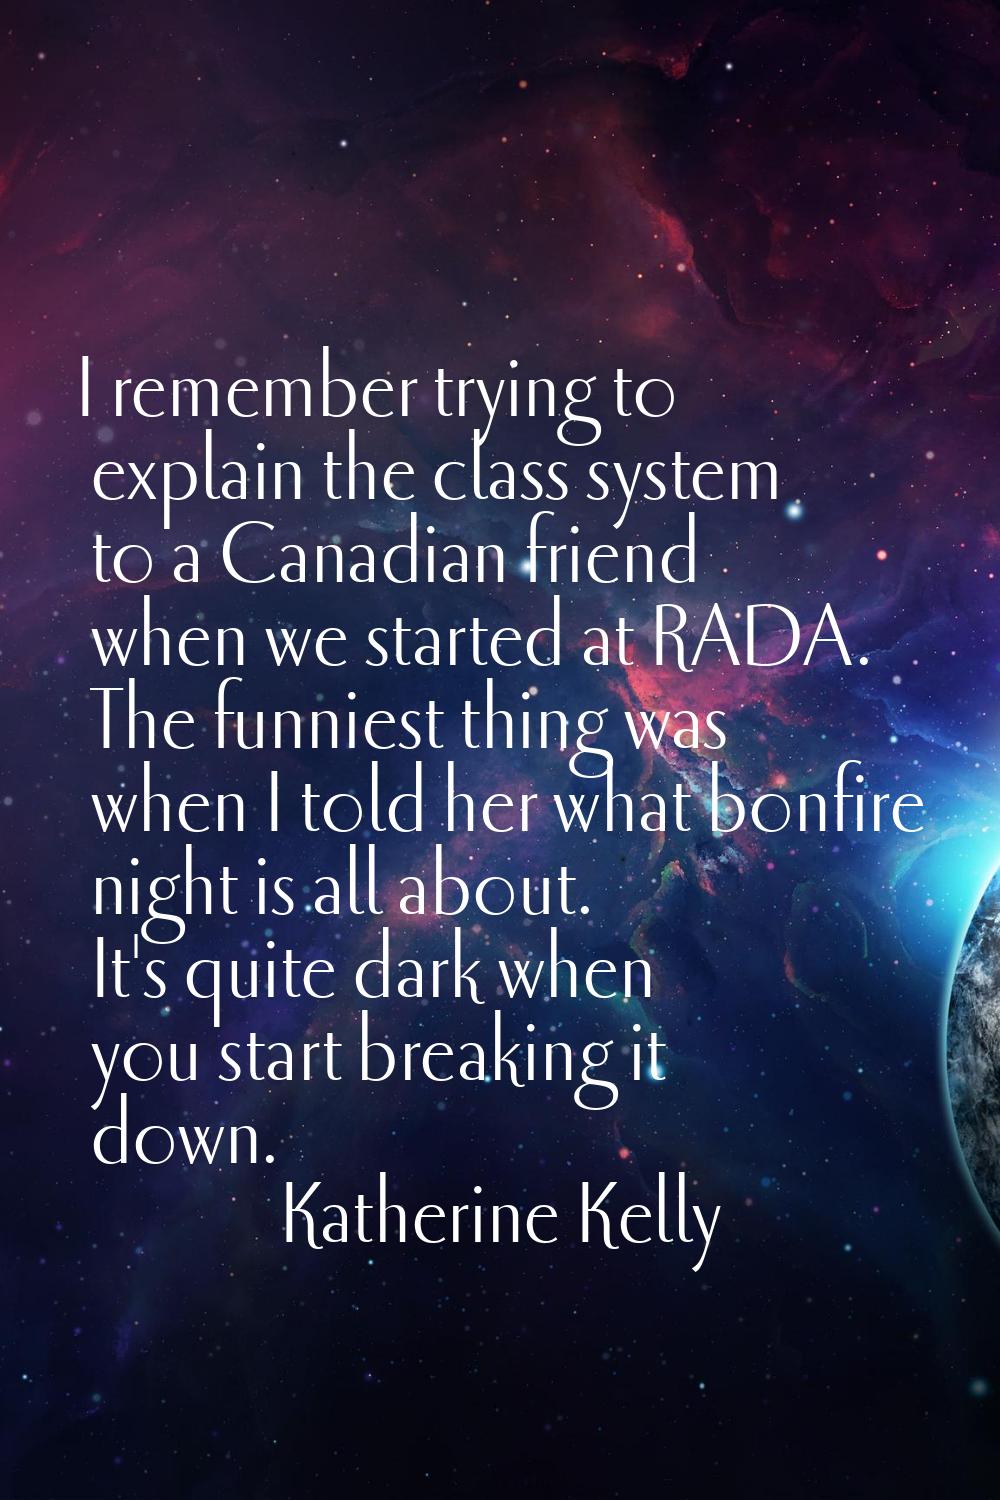 I remember trying to explain the class system to a Canadian friend when we started at RADA. The fun